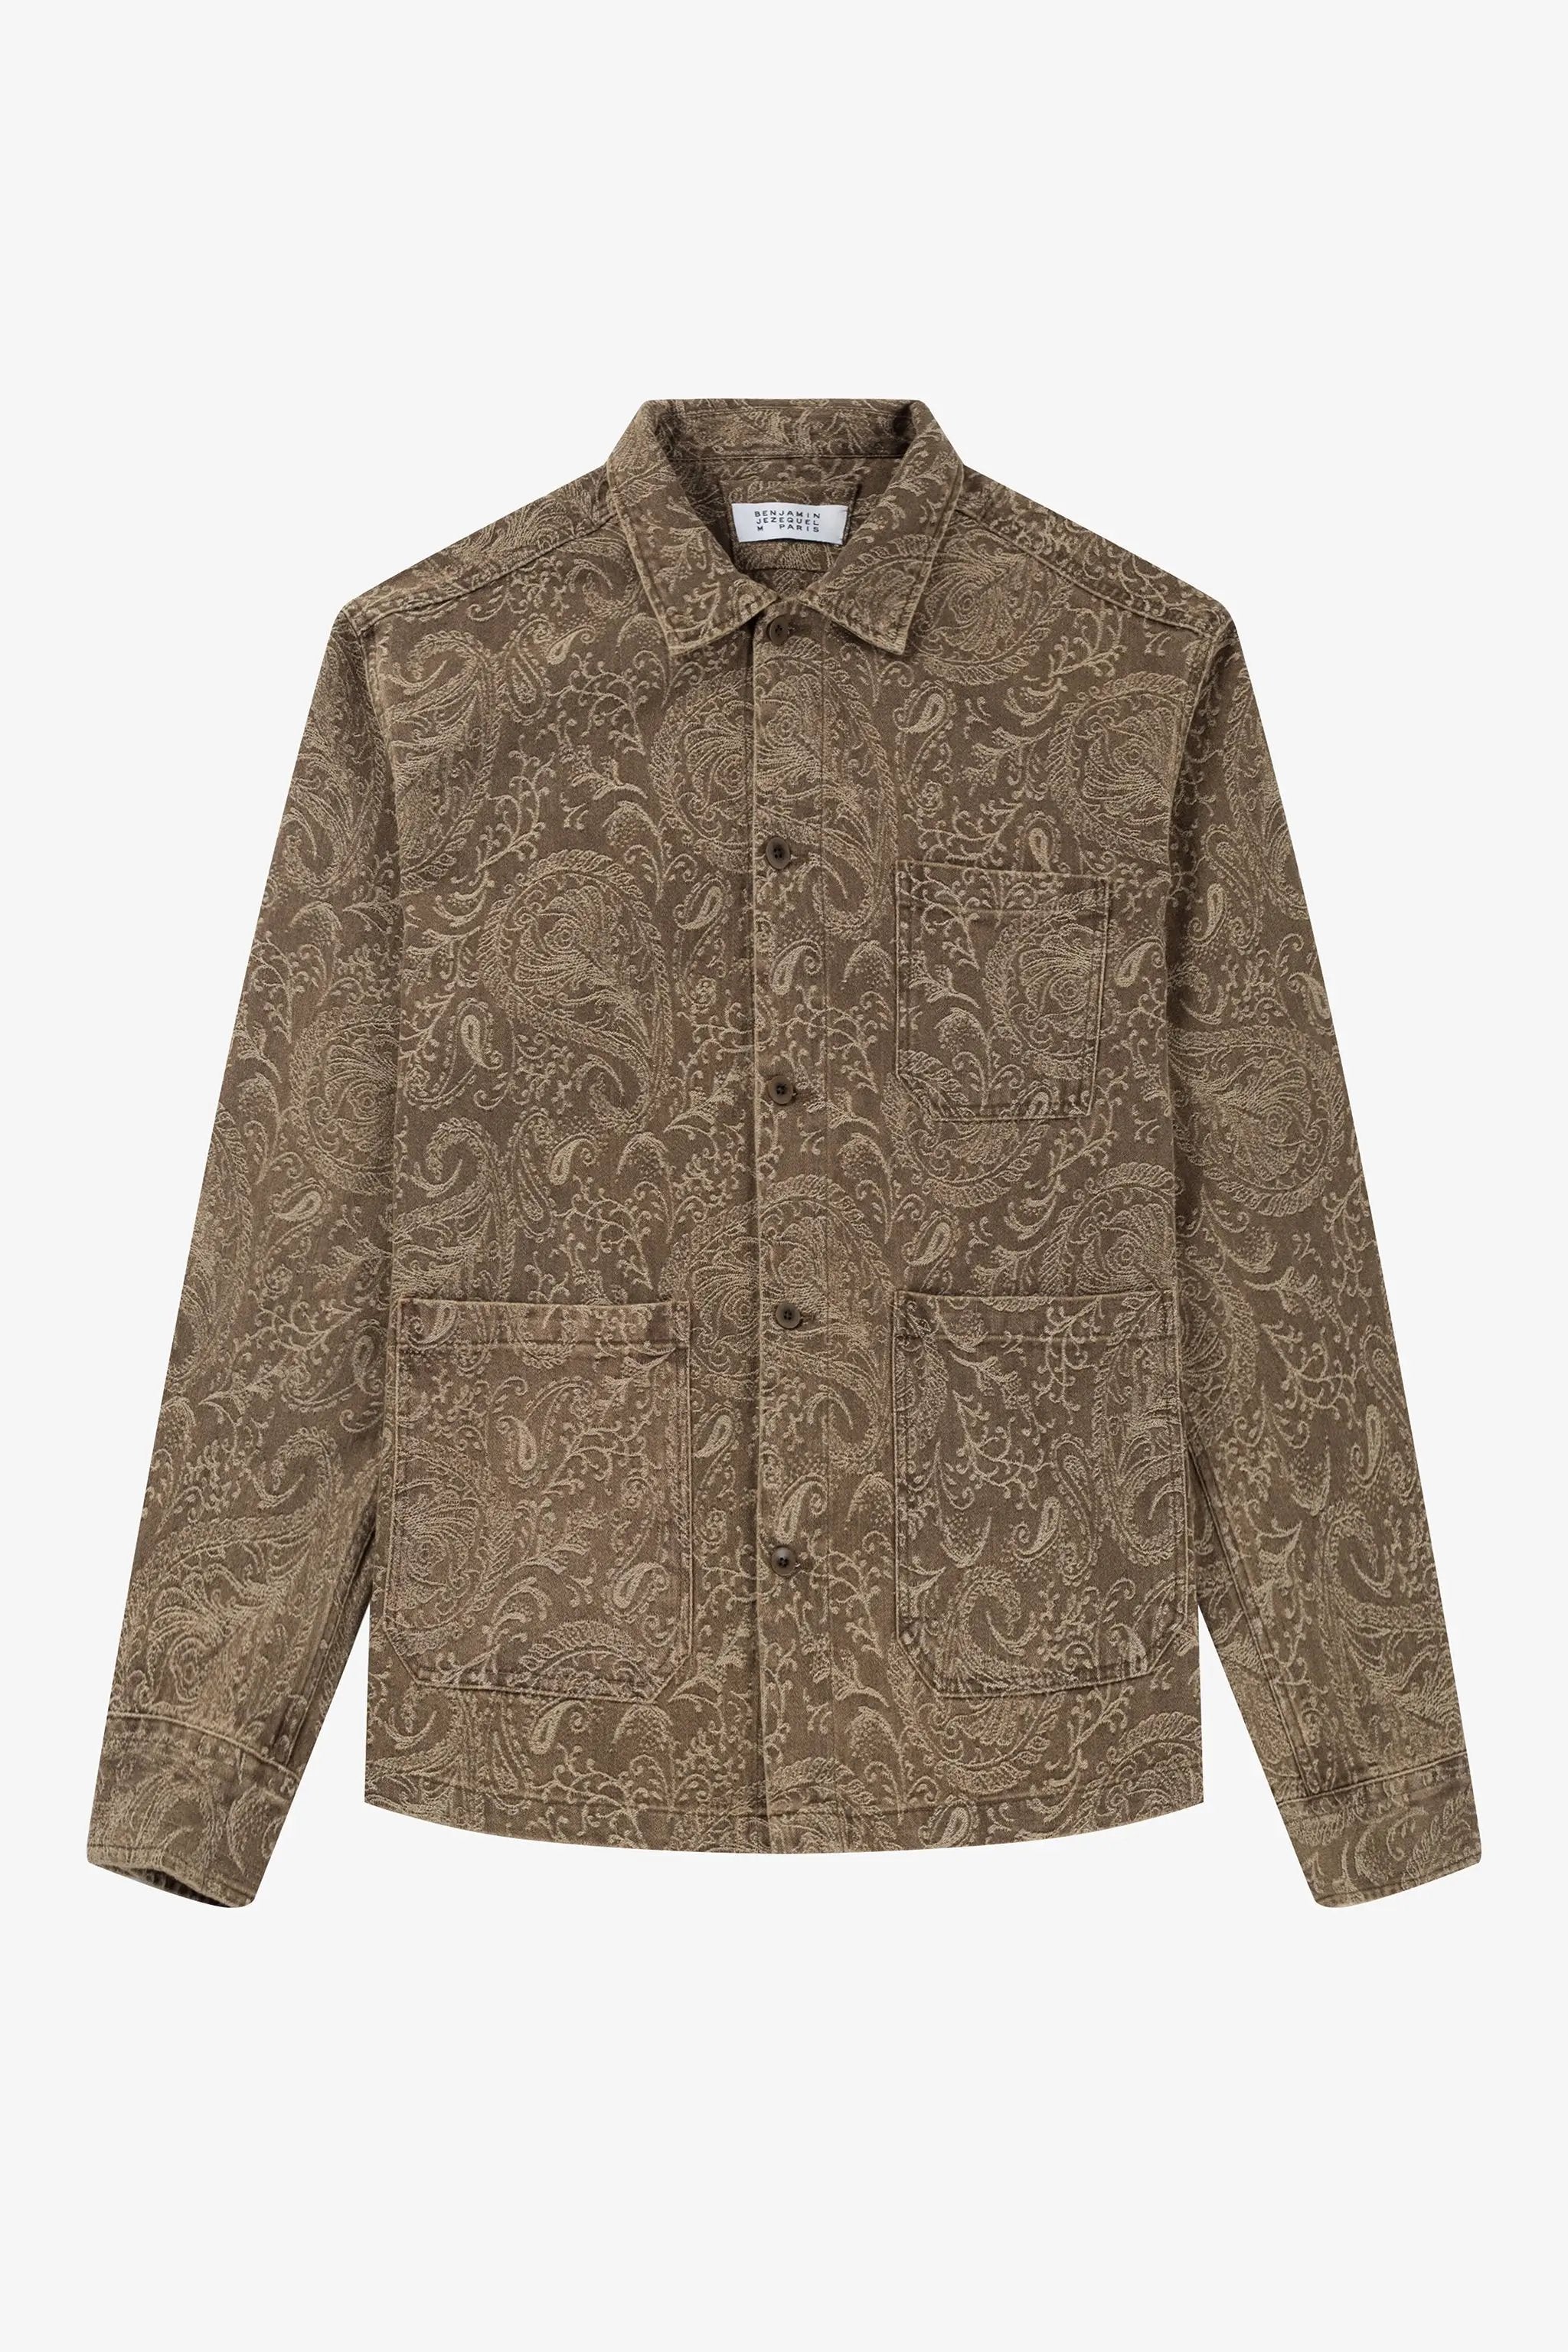 a brown jacket with a paisley pattern on it